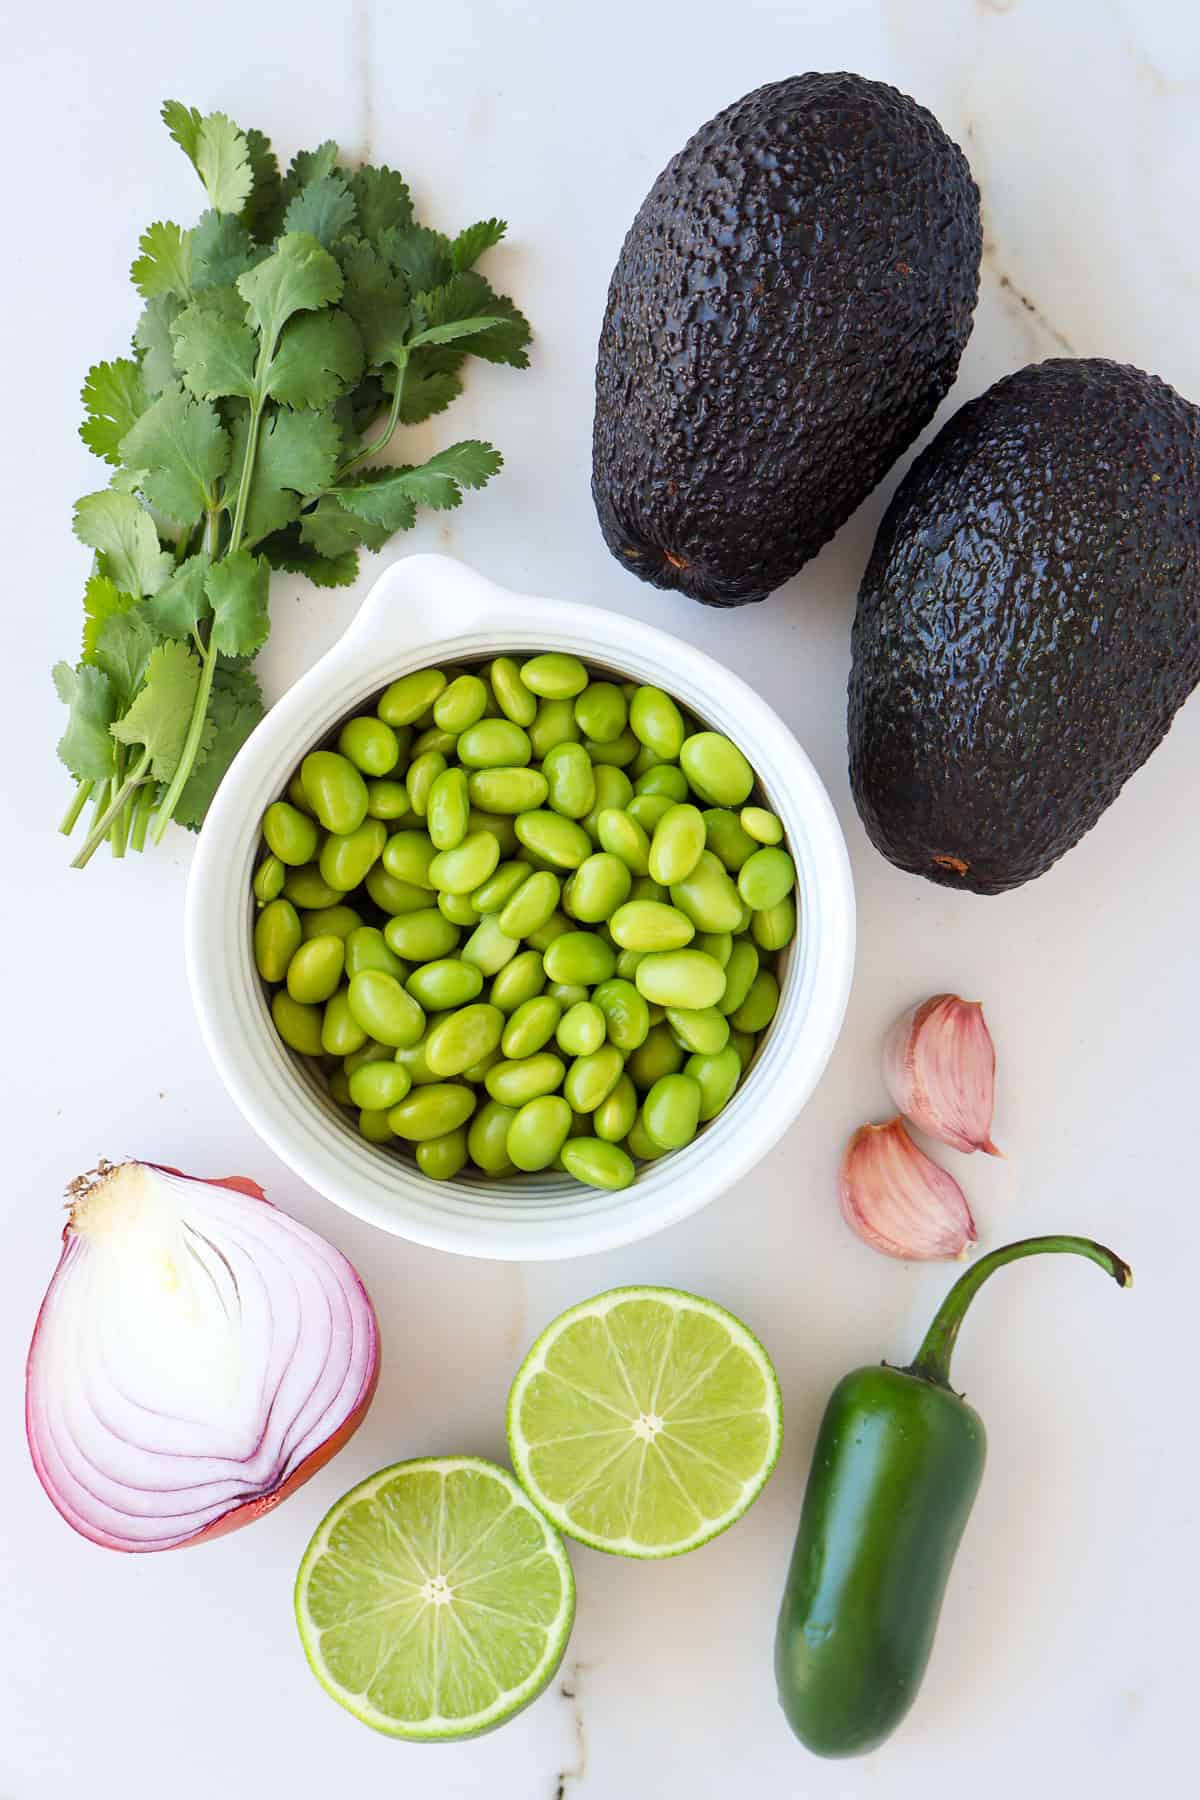 Ingredients shown to make guacamole.